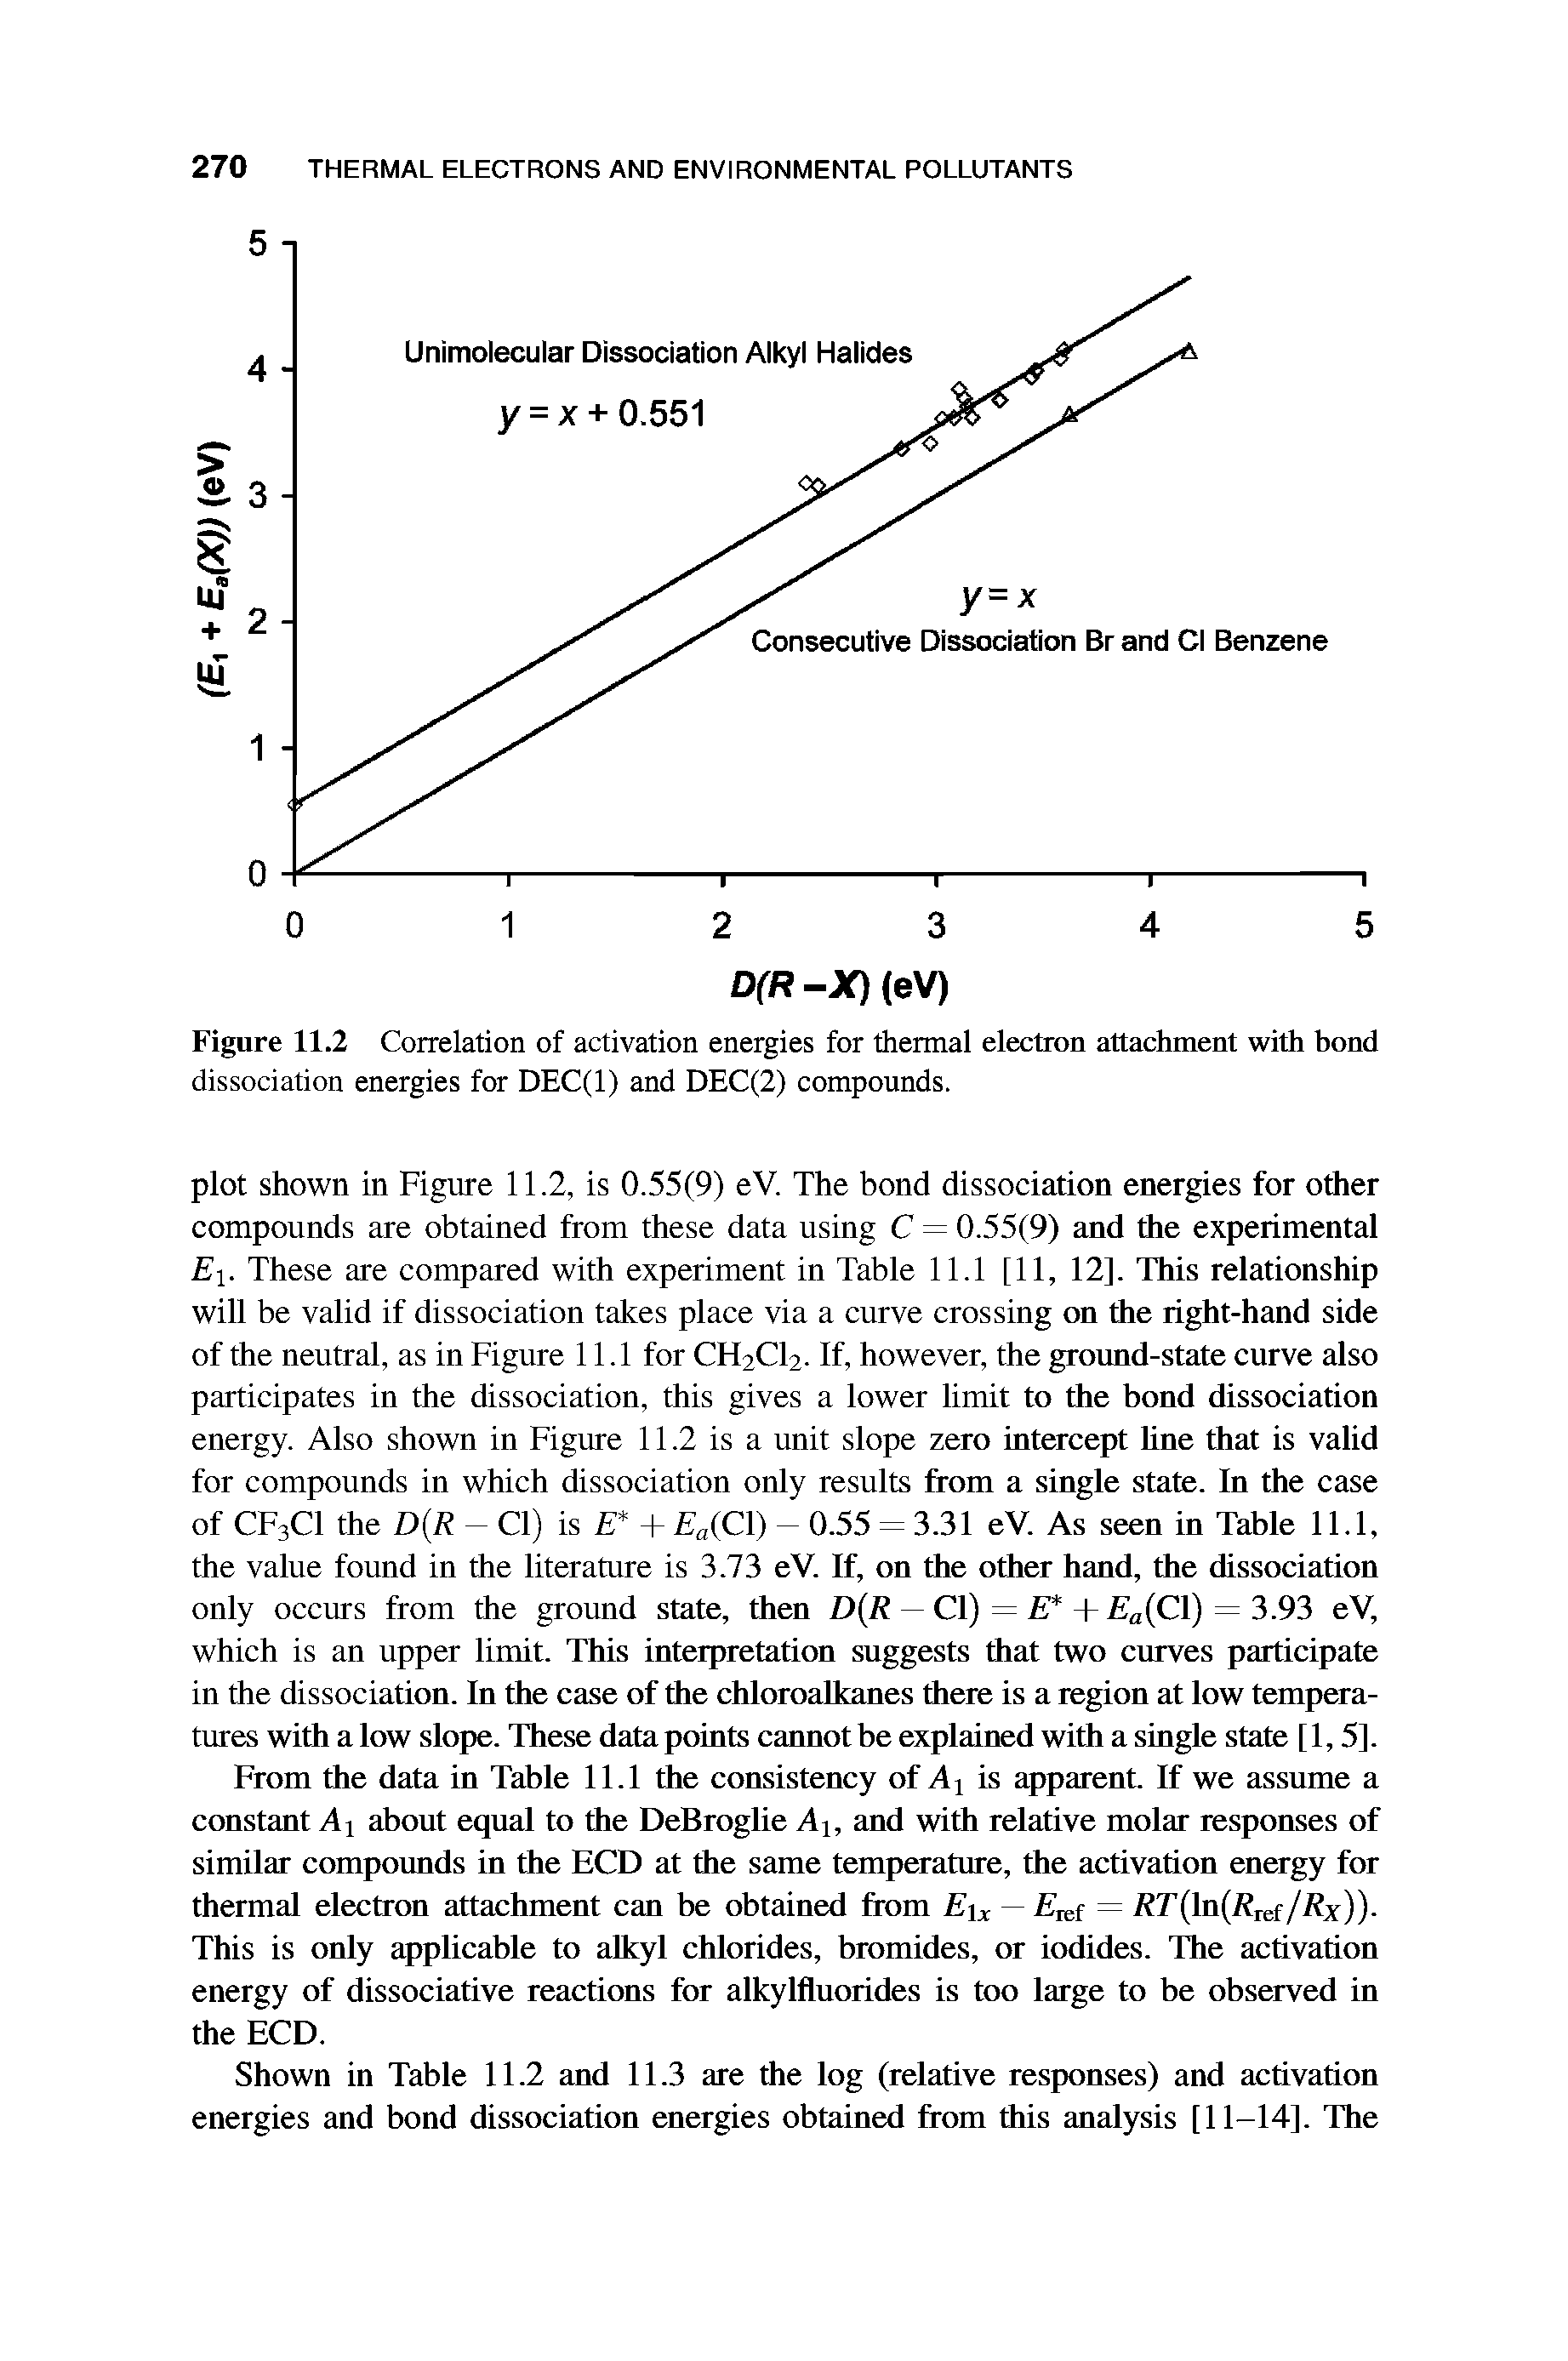 Figure 11.2 Correlation of activation energies for thermal electron attachment with bond dissociation energies for DEC(l) and DEC(2) compounds.